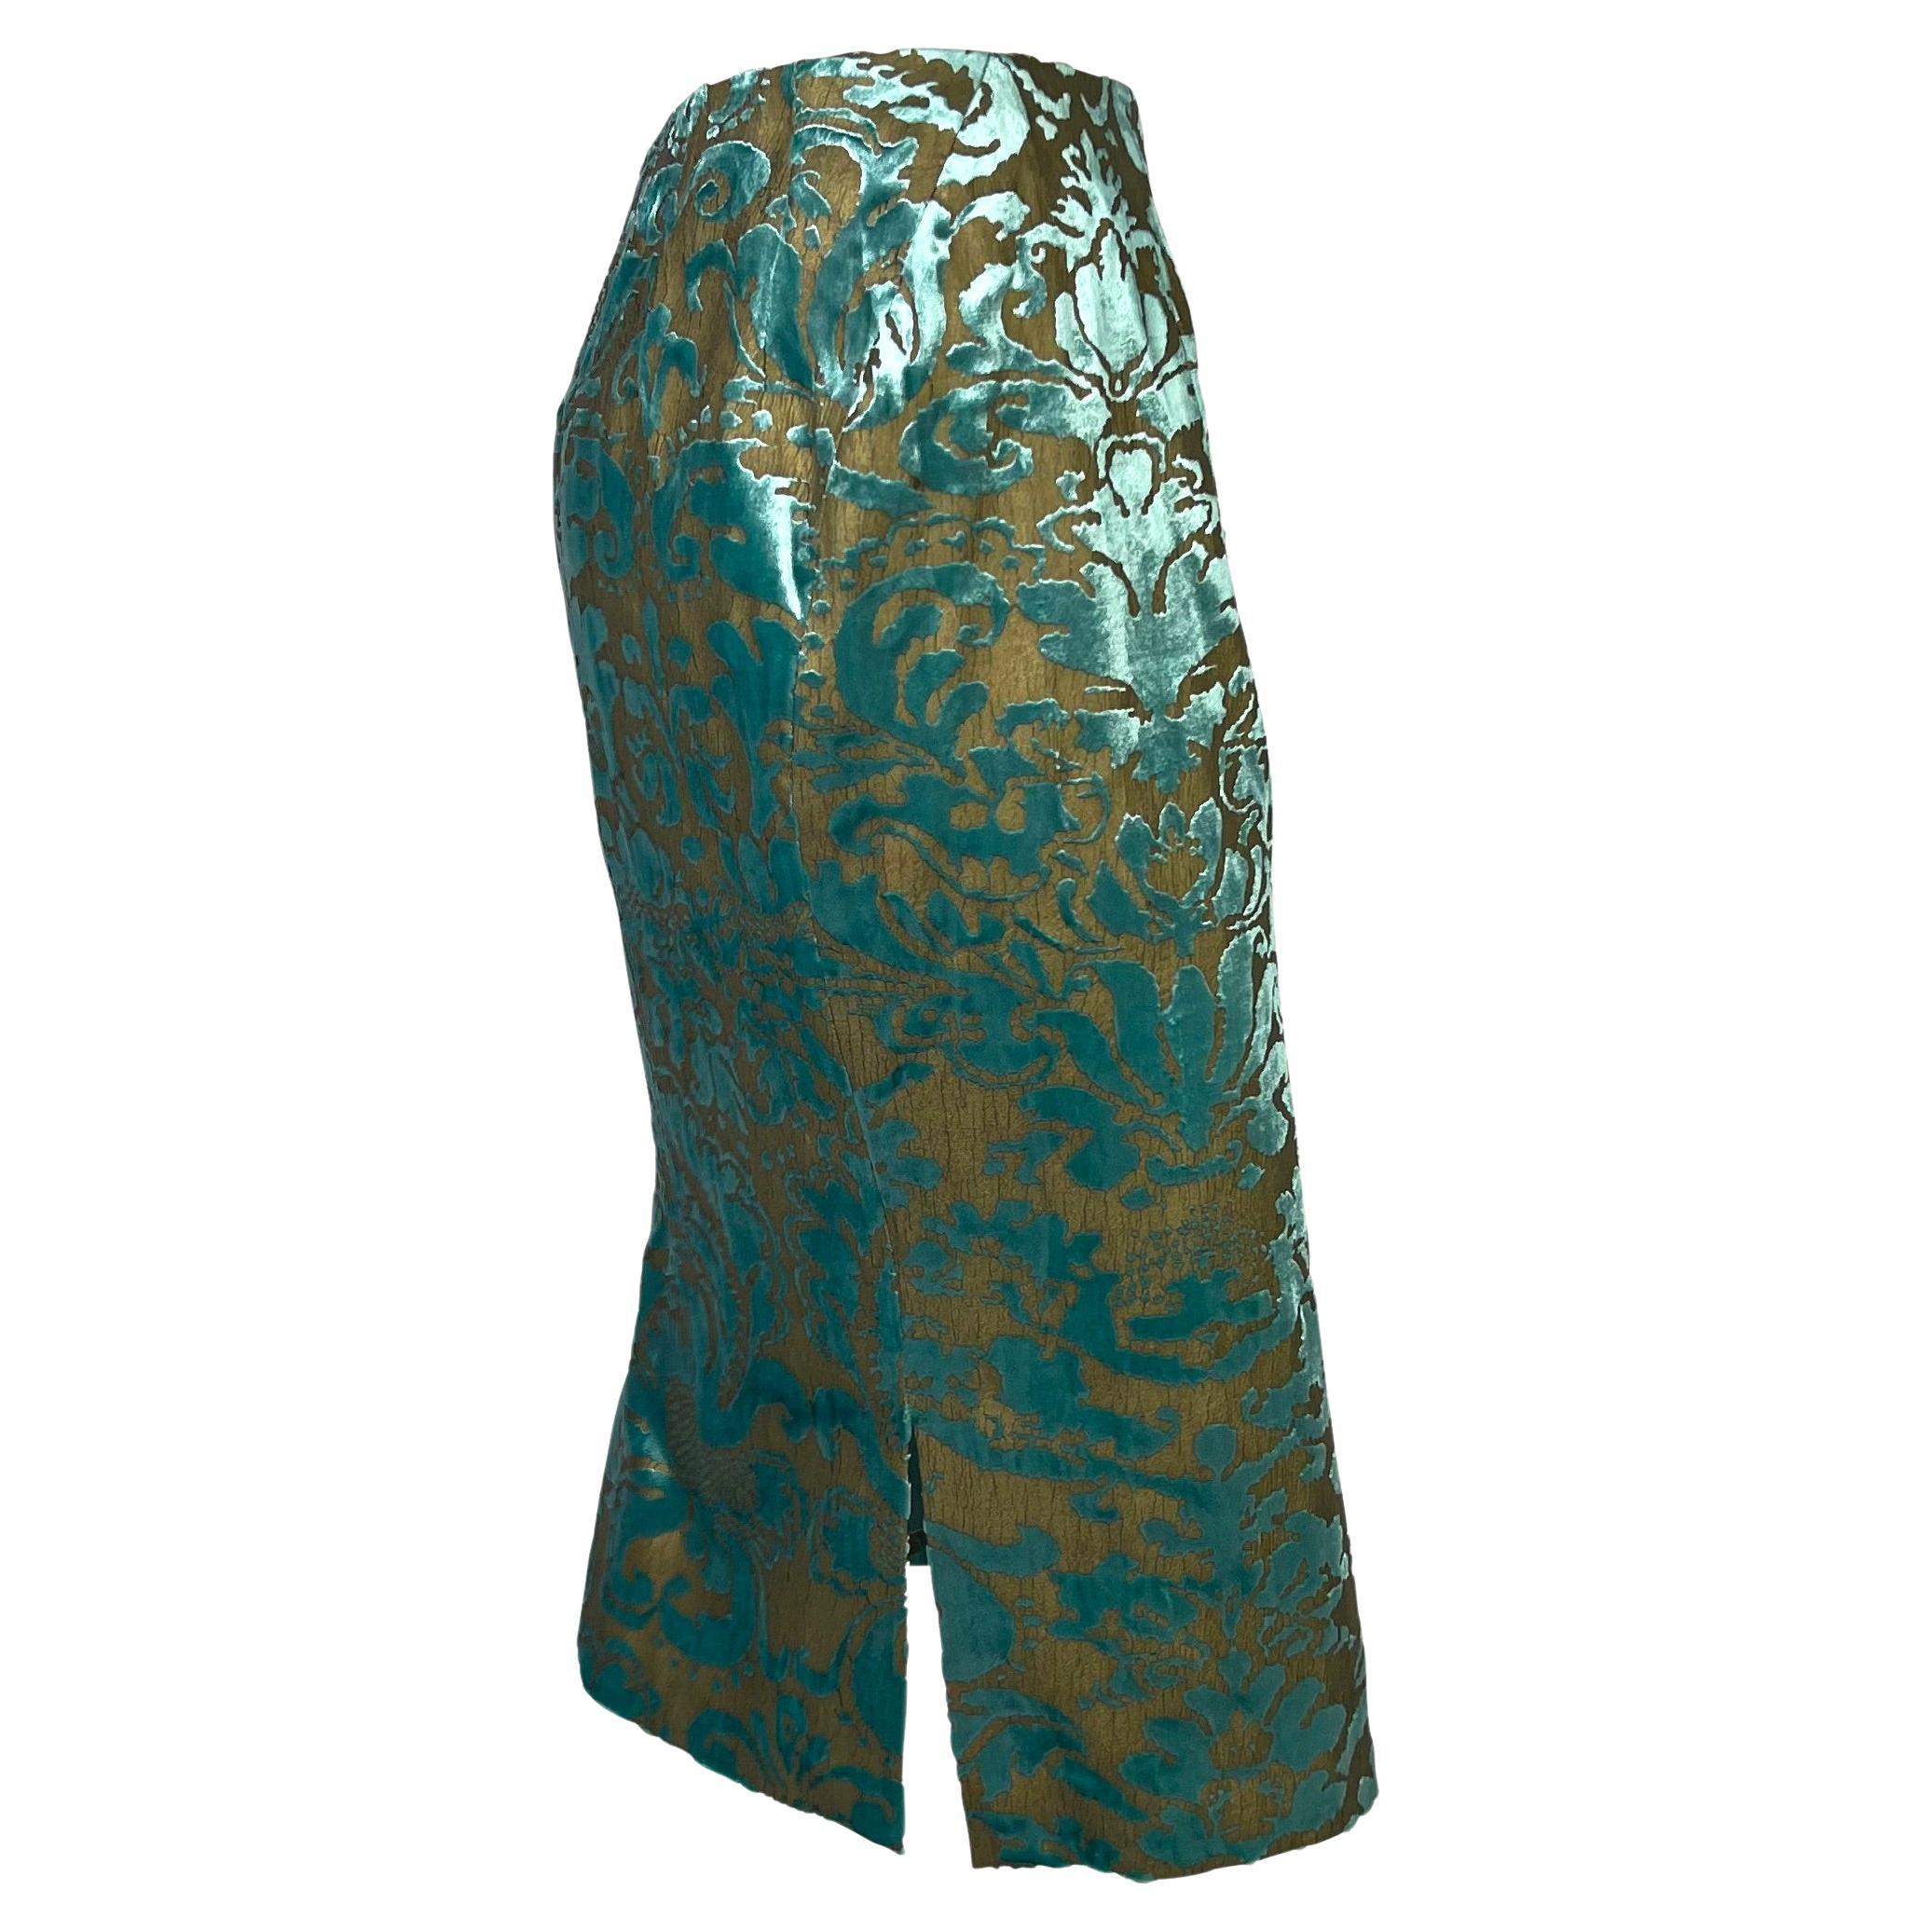 S/S 2000 Gucci by Tom Ford Floral Bronze Painted Teal Velvet Skirt Sample In Good Condition For Sale In West Hollywood, CA